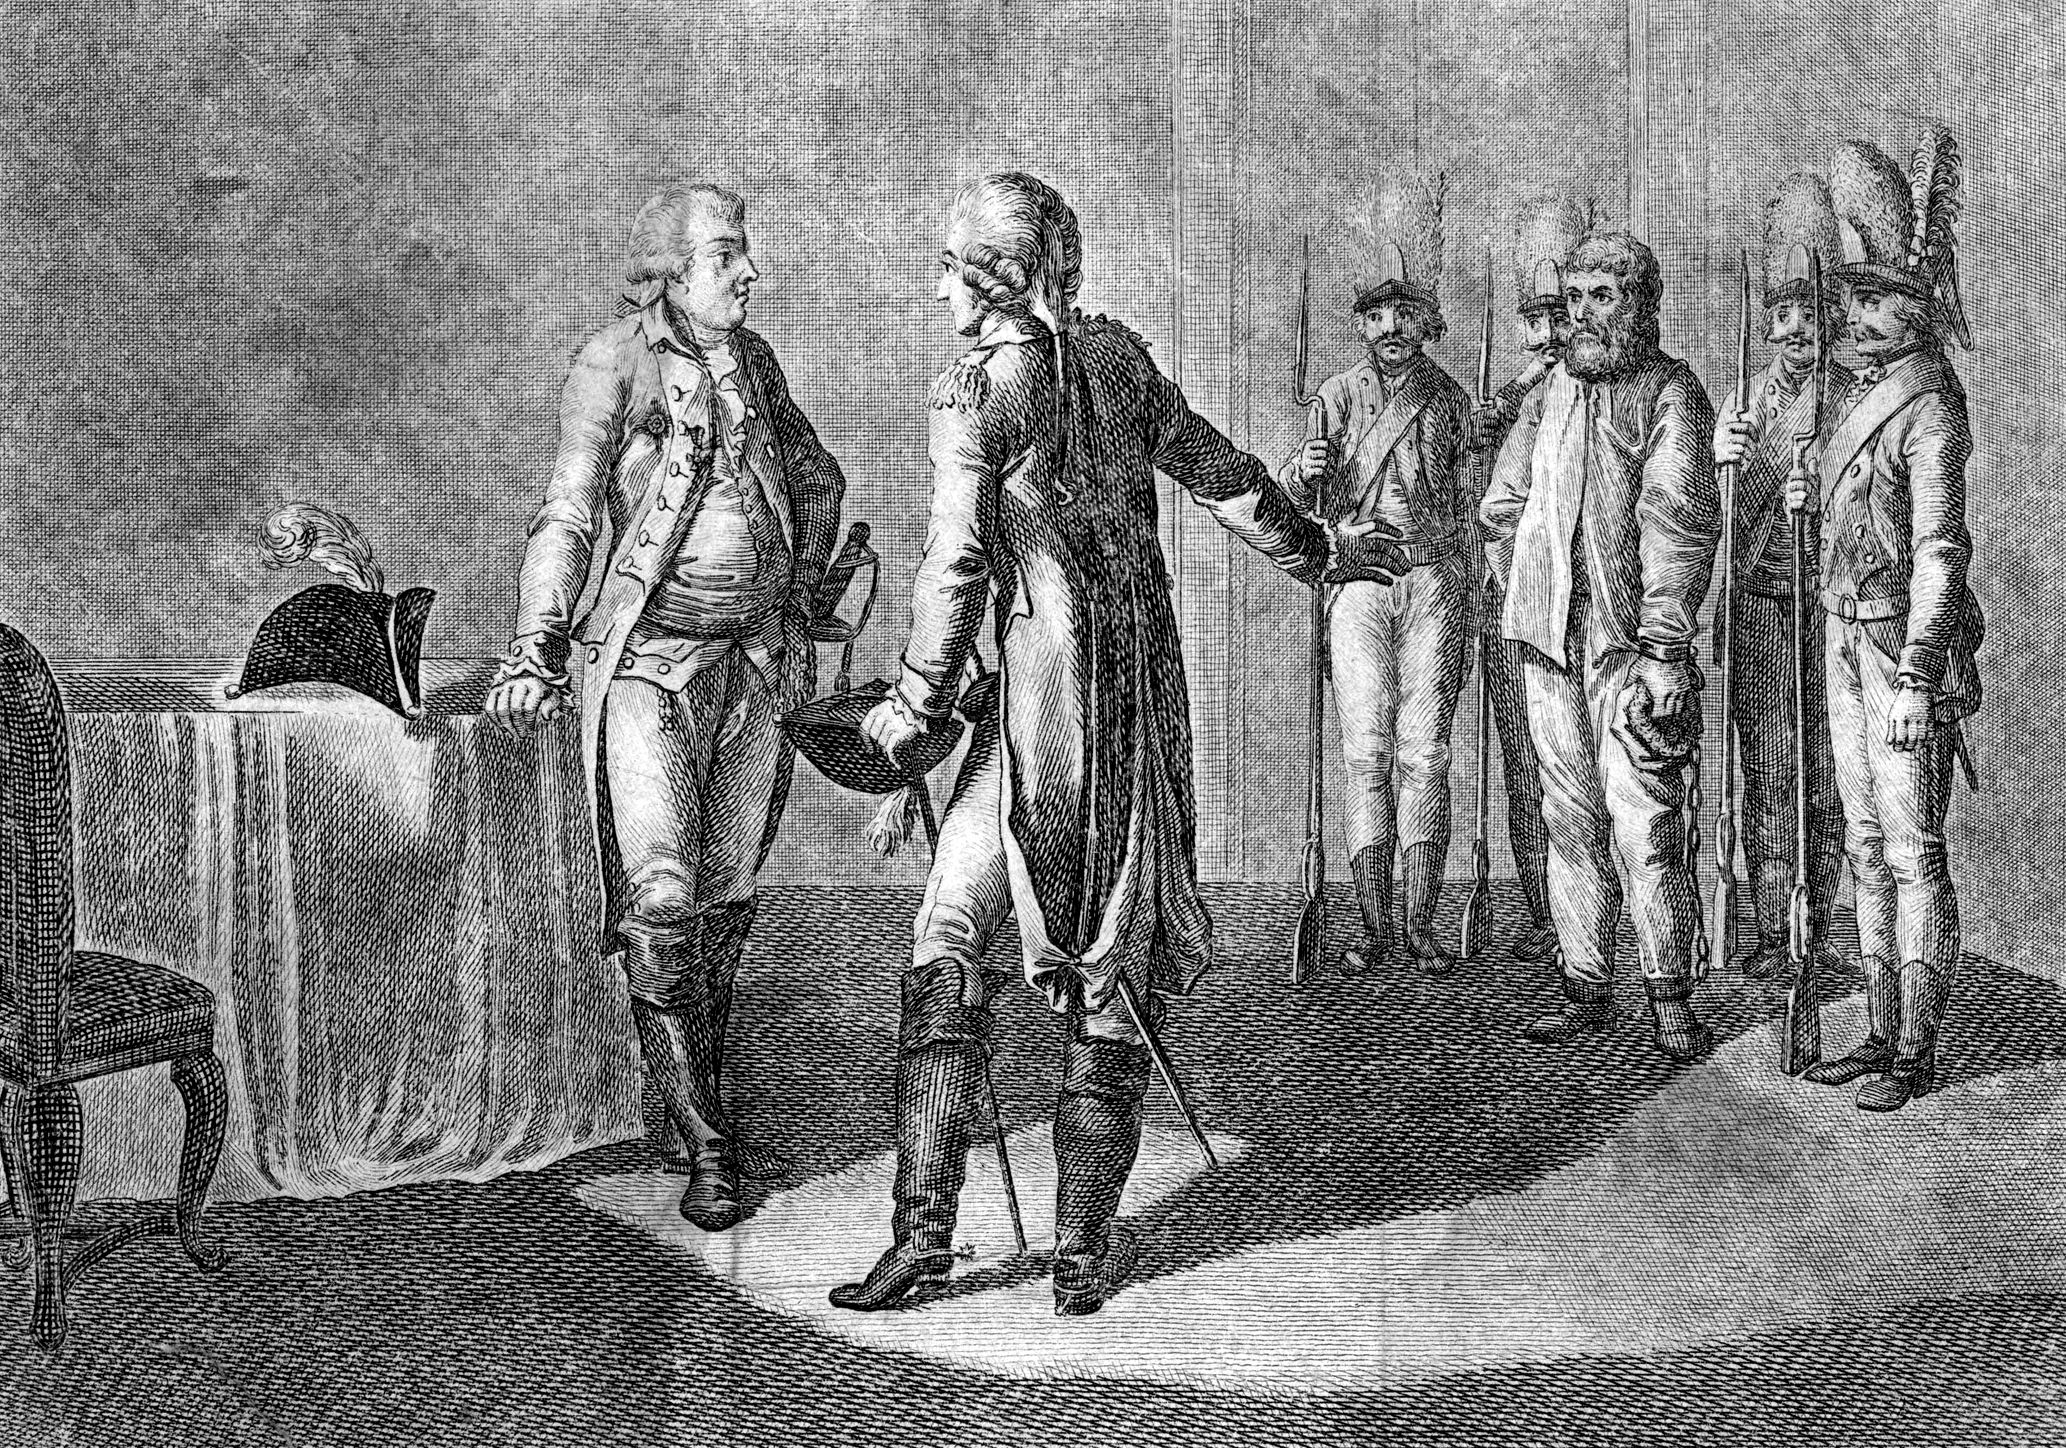 Pugachev, a Cossack soldier, proclaims himself Peter III and leads a rebellion against Catherine II, but is defeated, taken to Moscow in an iron cage, and then executed Date: 1775